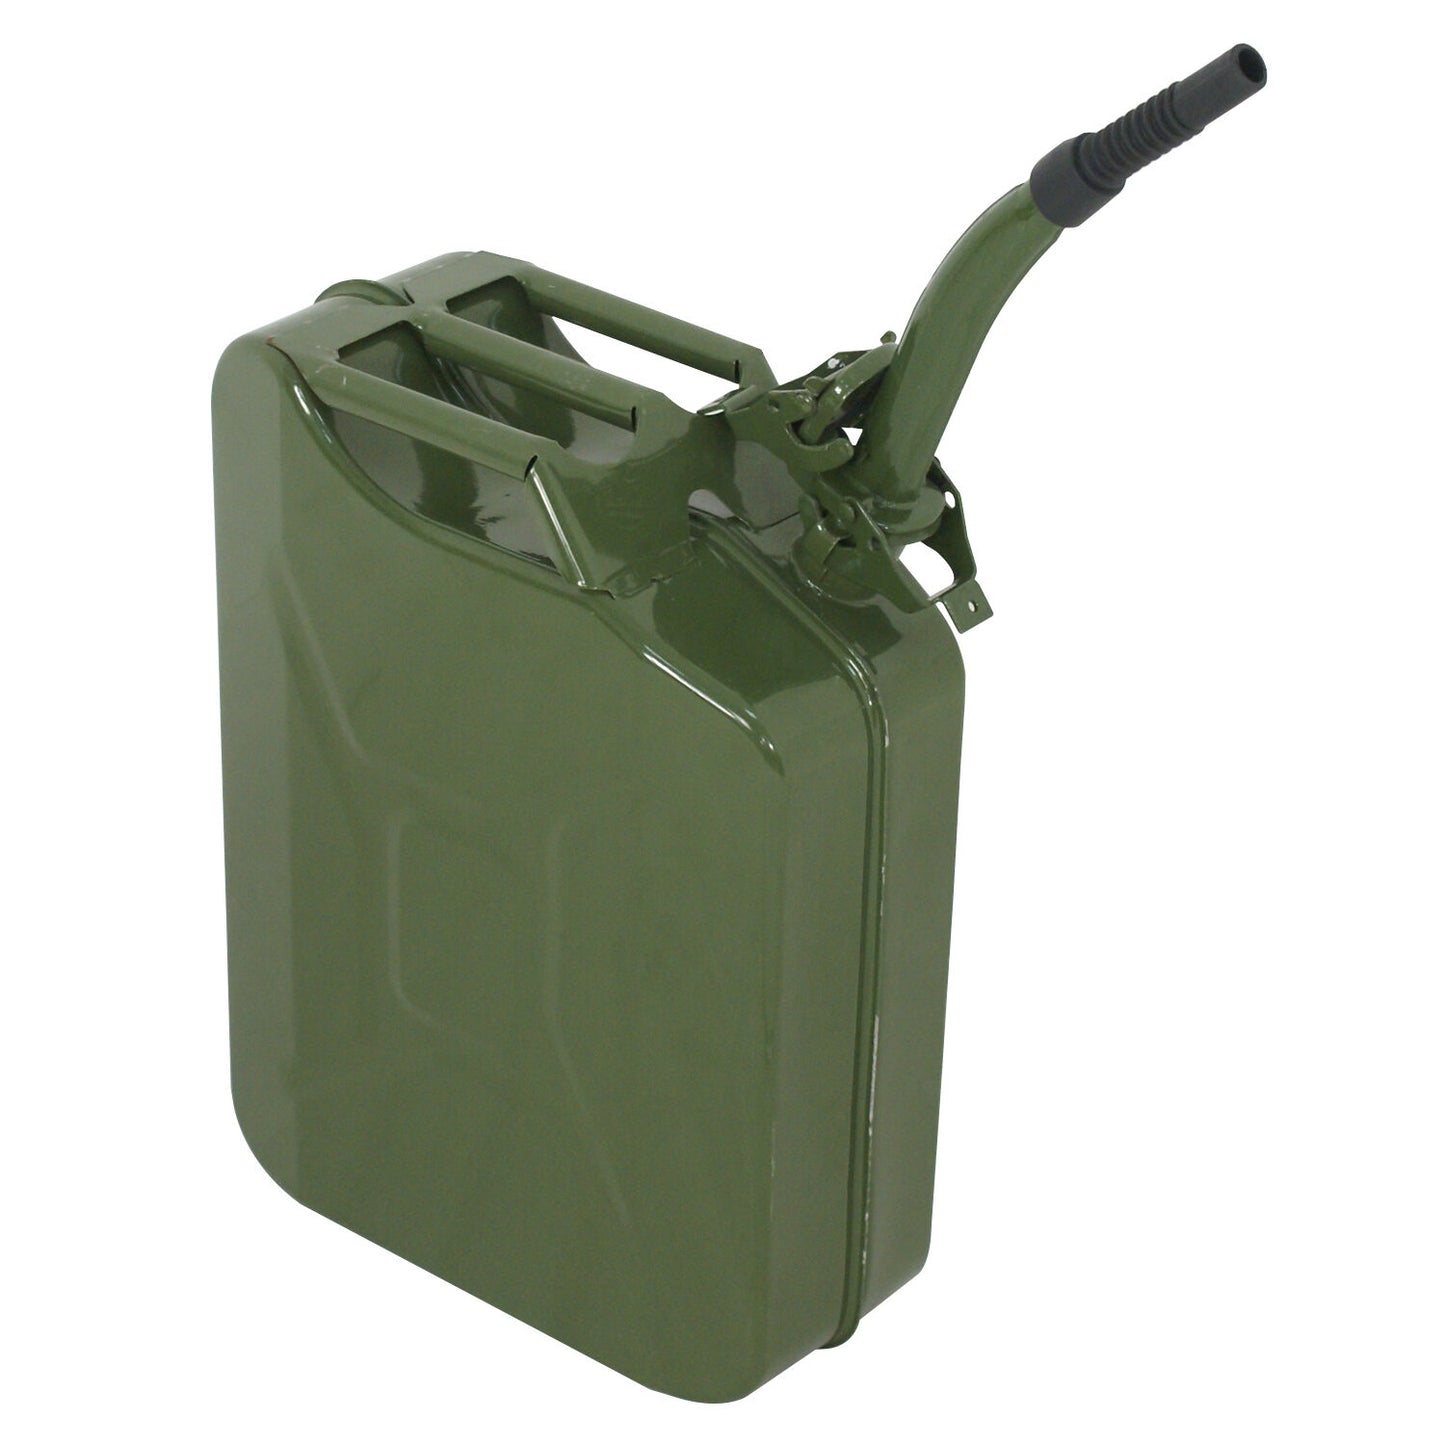 3X Jerry Can 5 Gallon 20L Metal Steel Tank Army Backup Gas Gasoline Emergency